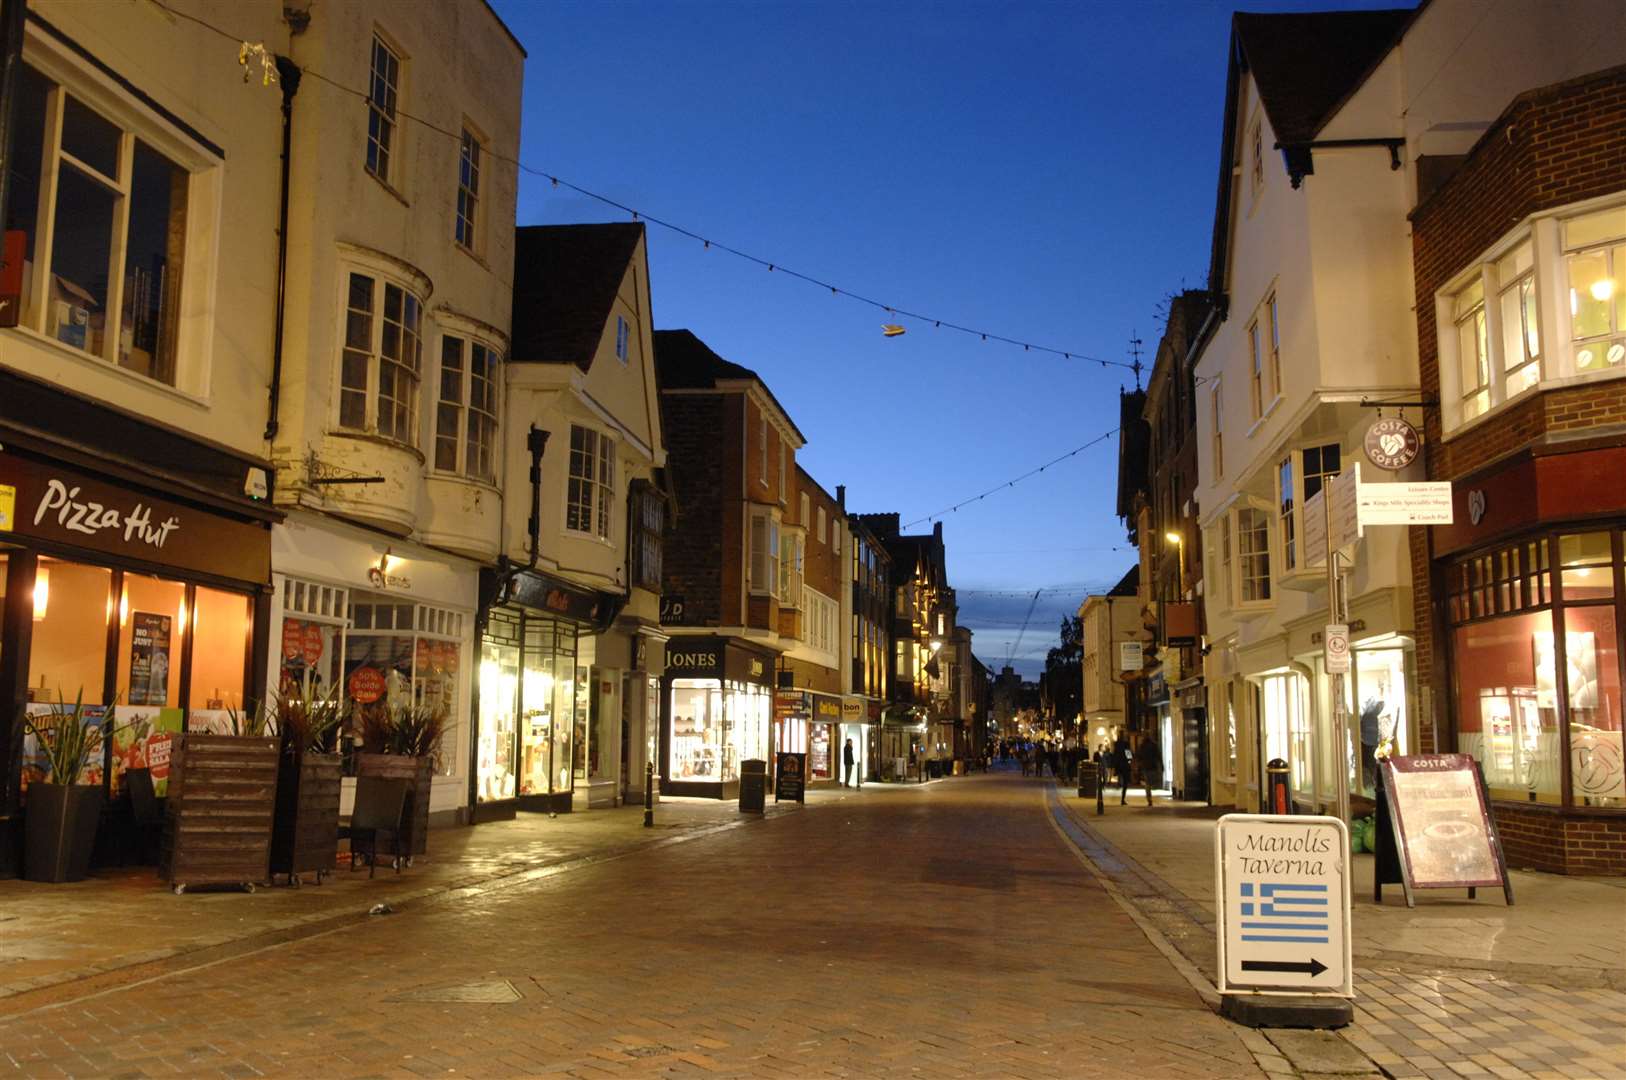 The assault happened in Canterbury high street